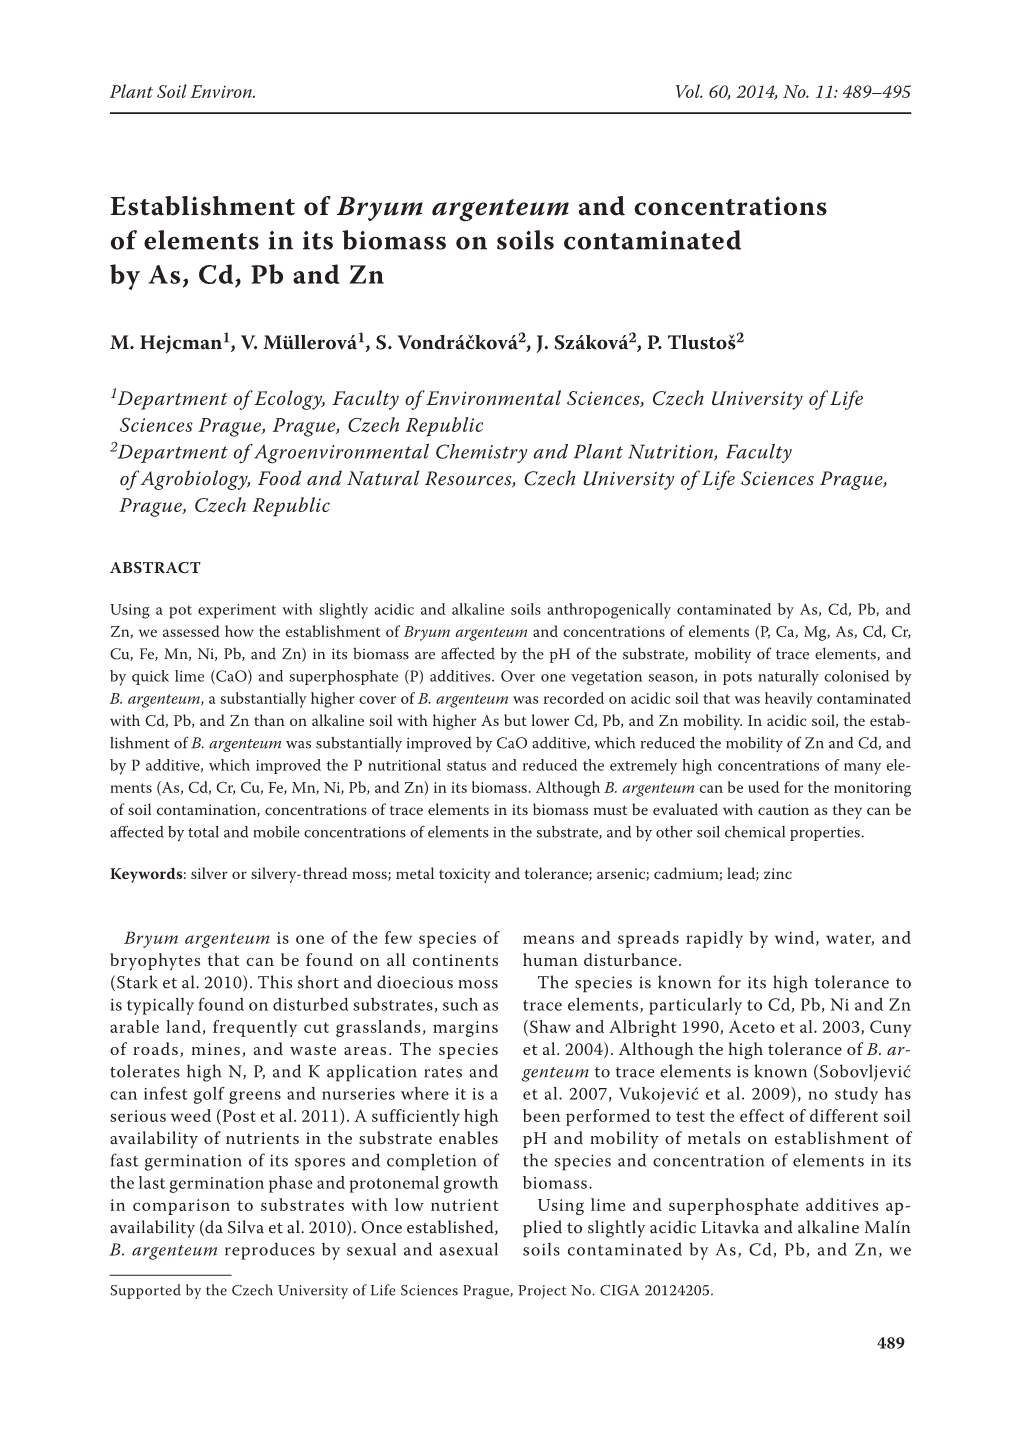 Establishment of Bryum Argenteum and Concentrations of Elements in Its Biomass on Soils Contaminated by As, Cd, Pb and Zn